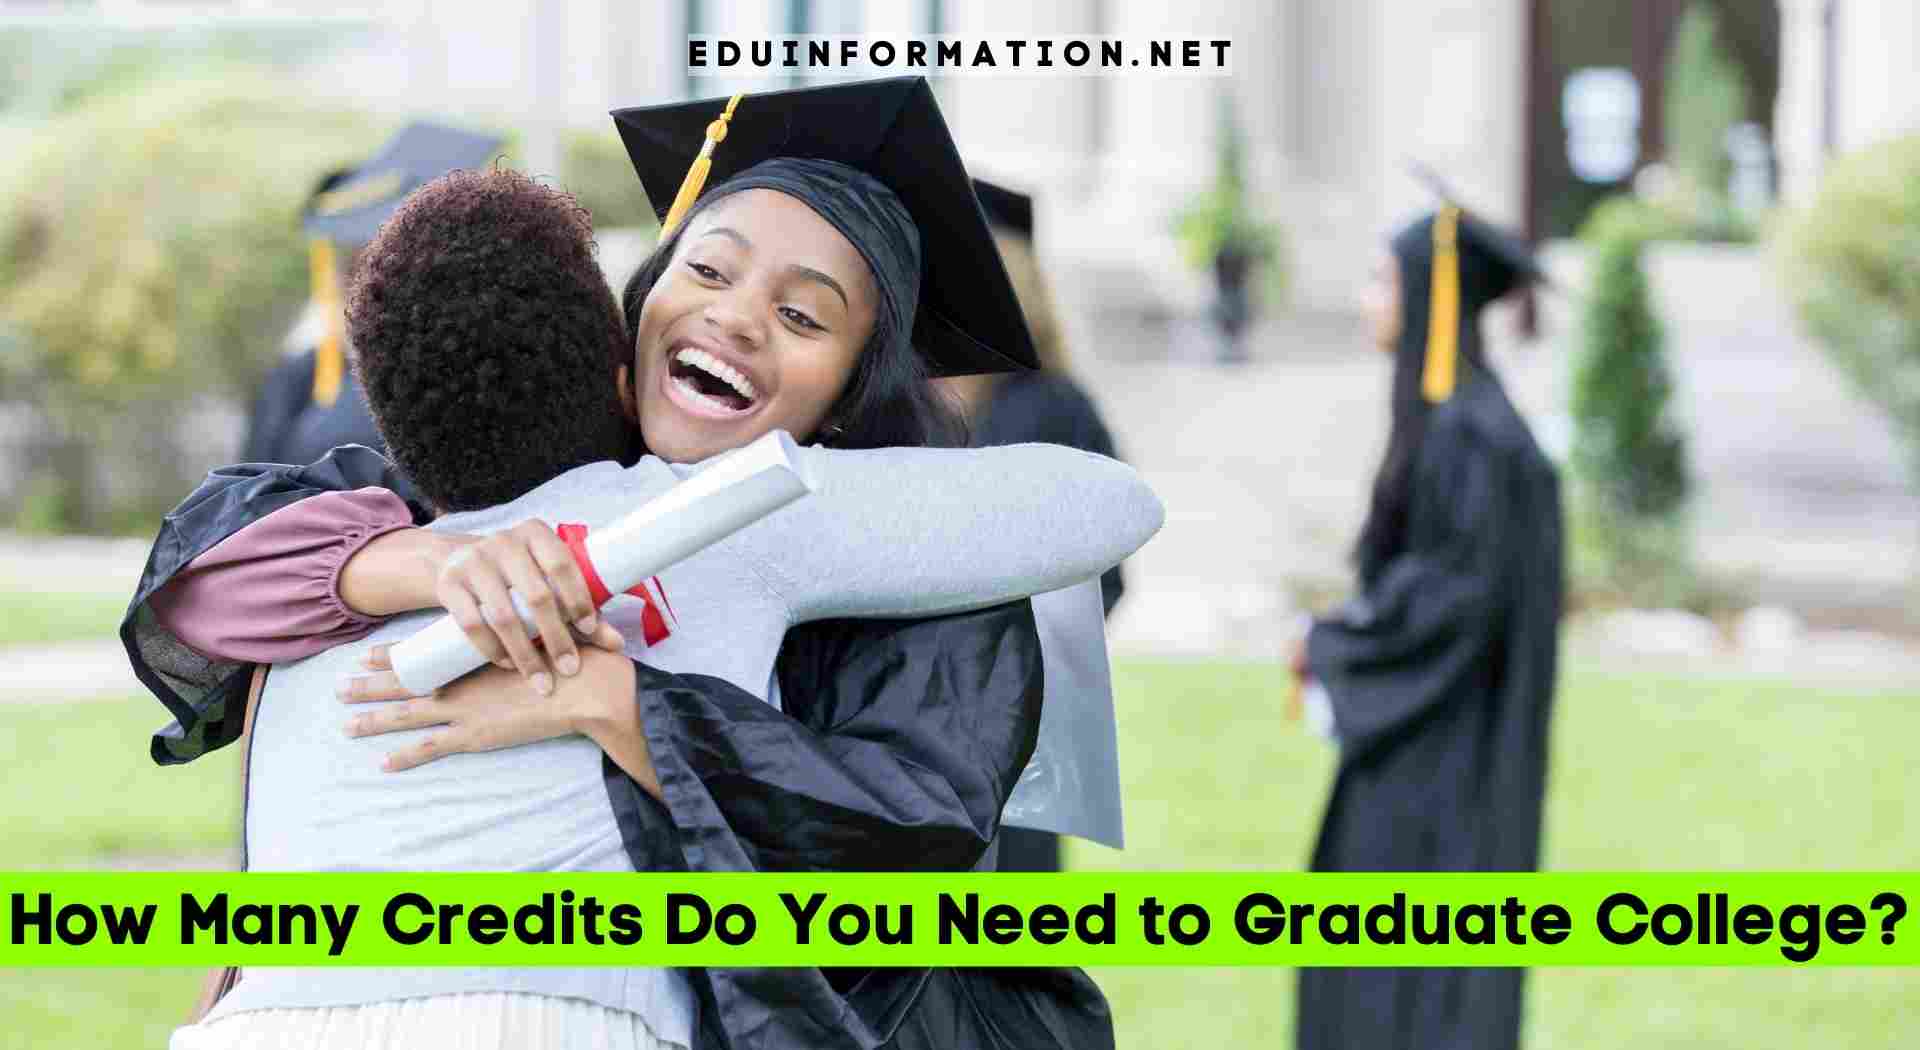 How Many Credits Do You Need to Graduate College?